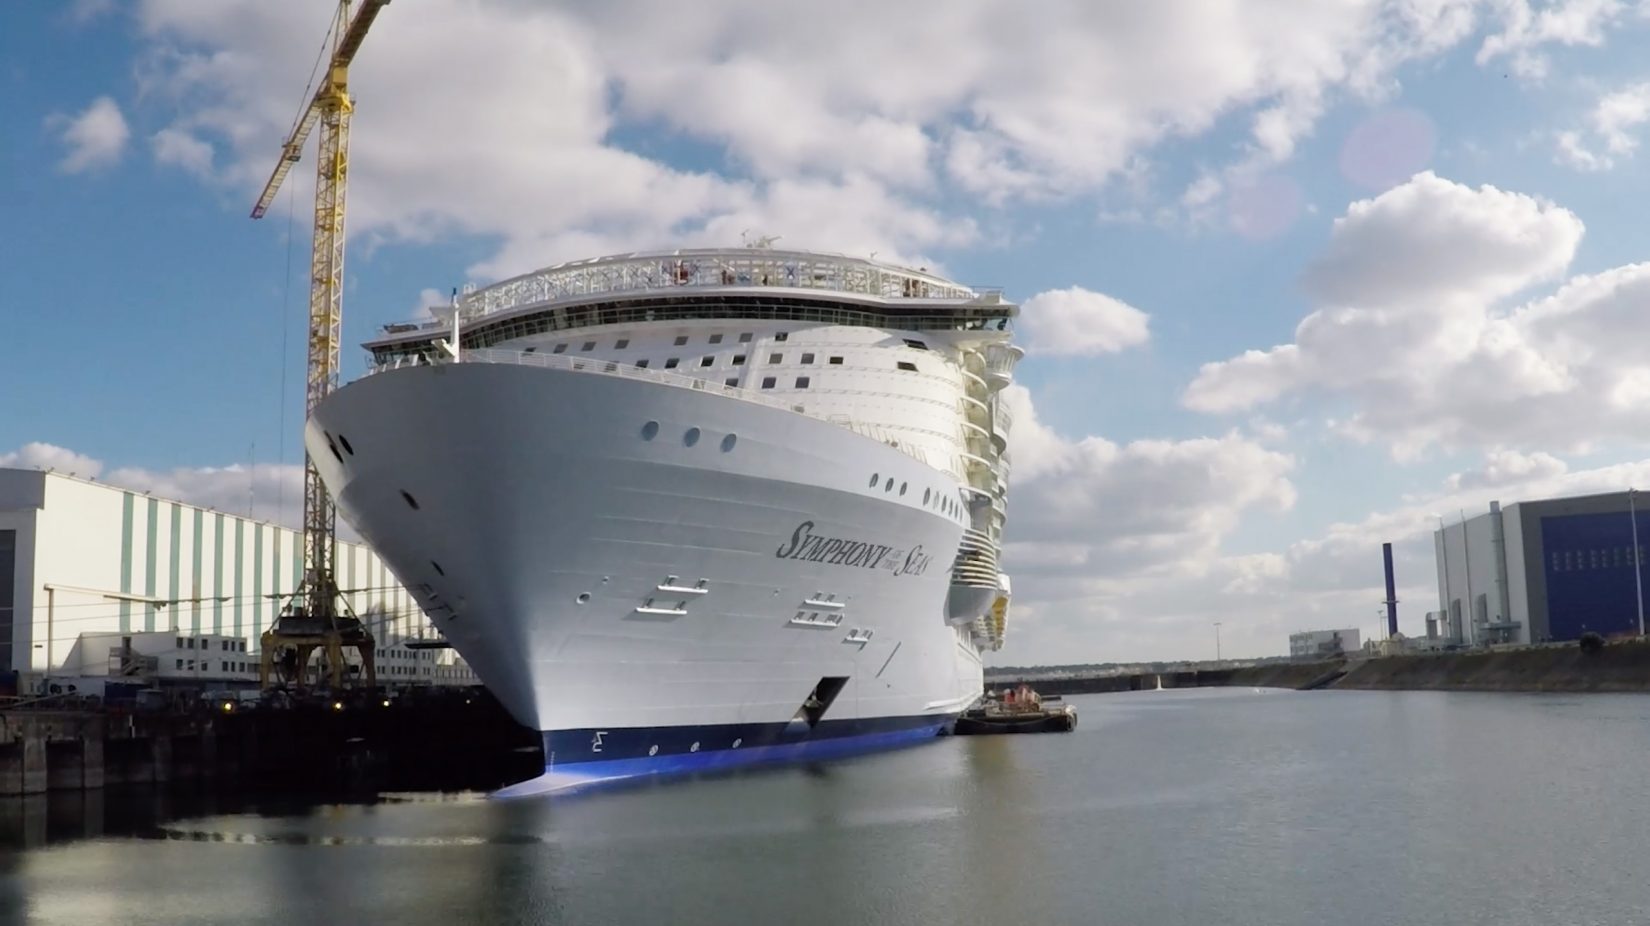 Meet the Captain of the Largest Ship in the World | Royal Caribbean Blog